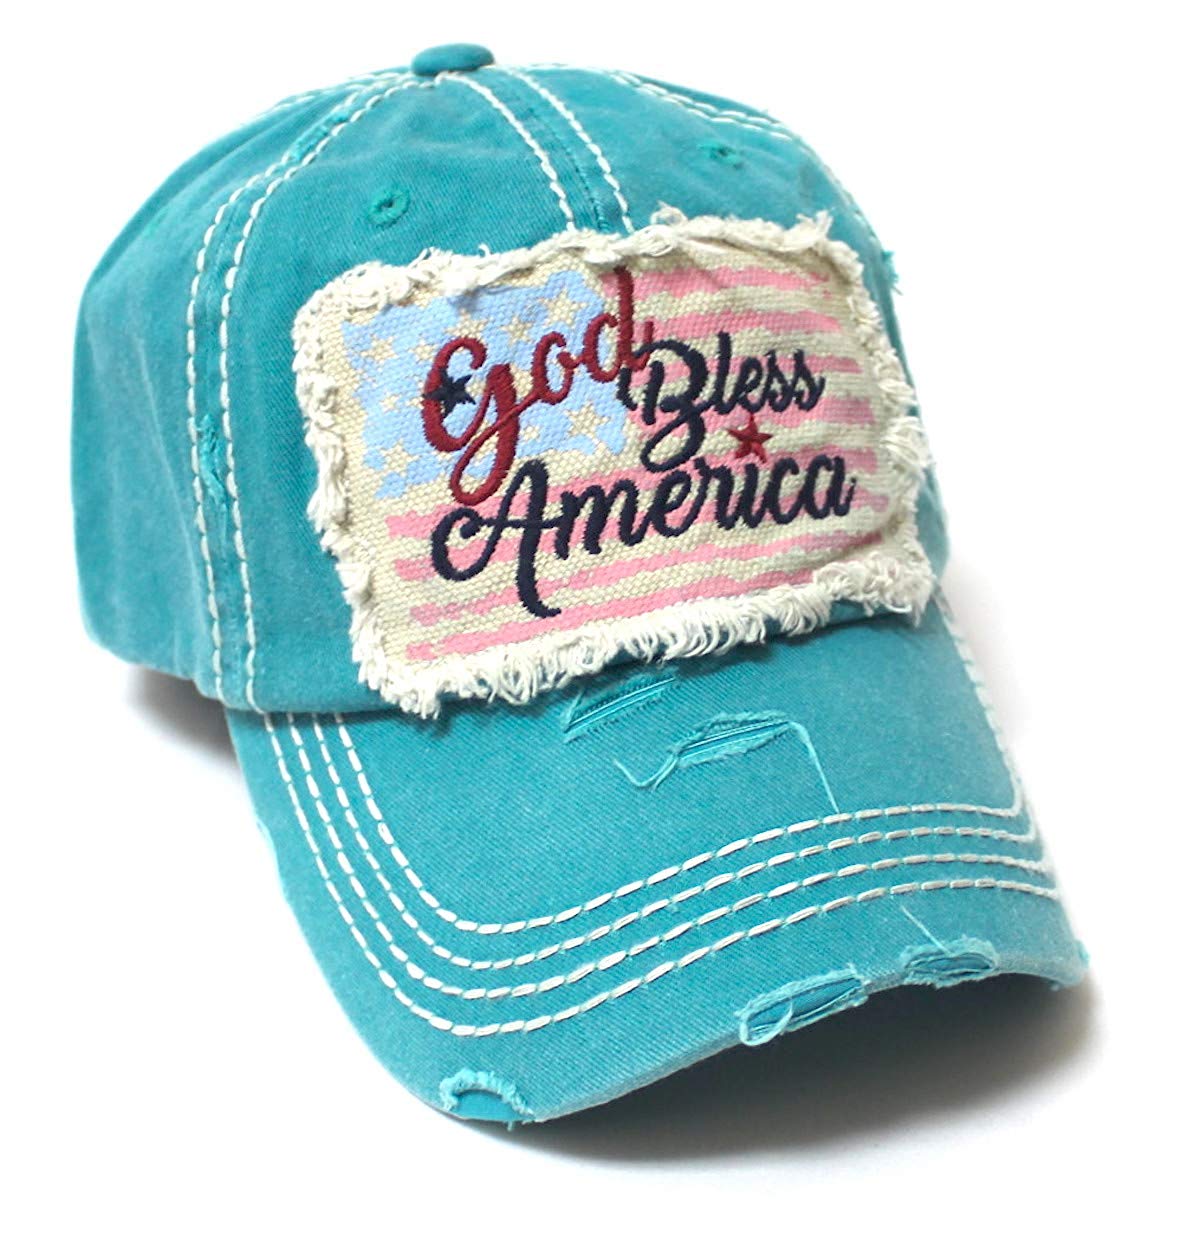 July 4 Celebratory USA Flag Patch God Bless America Embroidery Ballcap, Turquoise - Caps 'N Vintage 